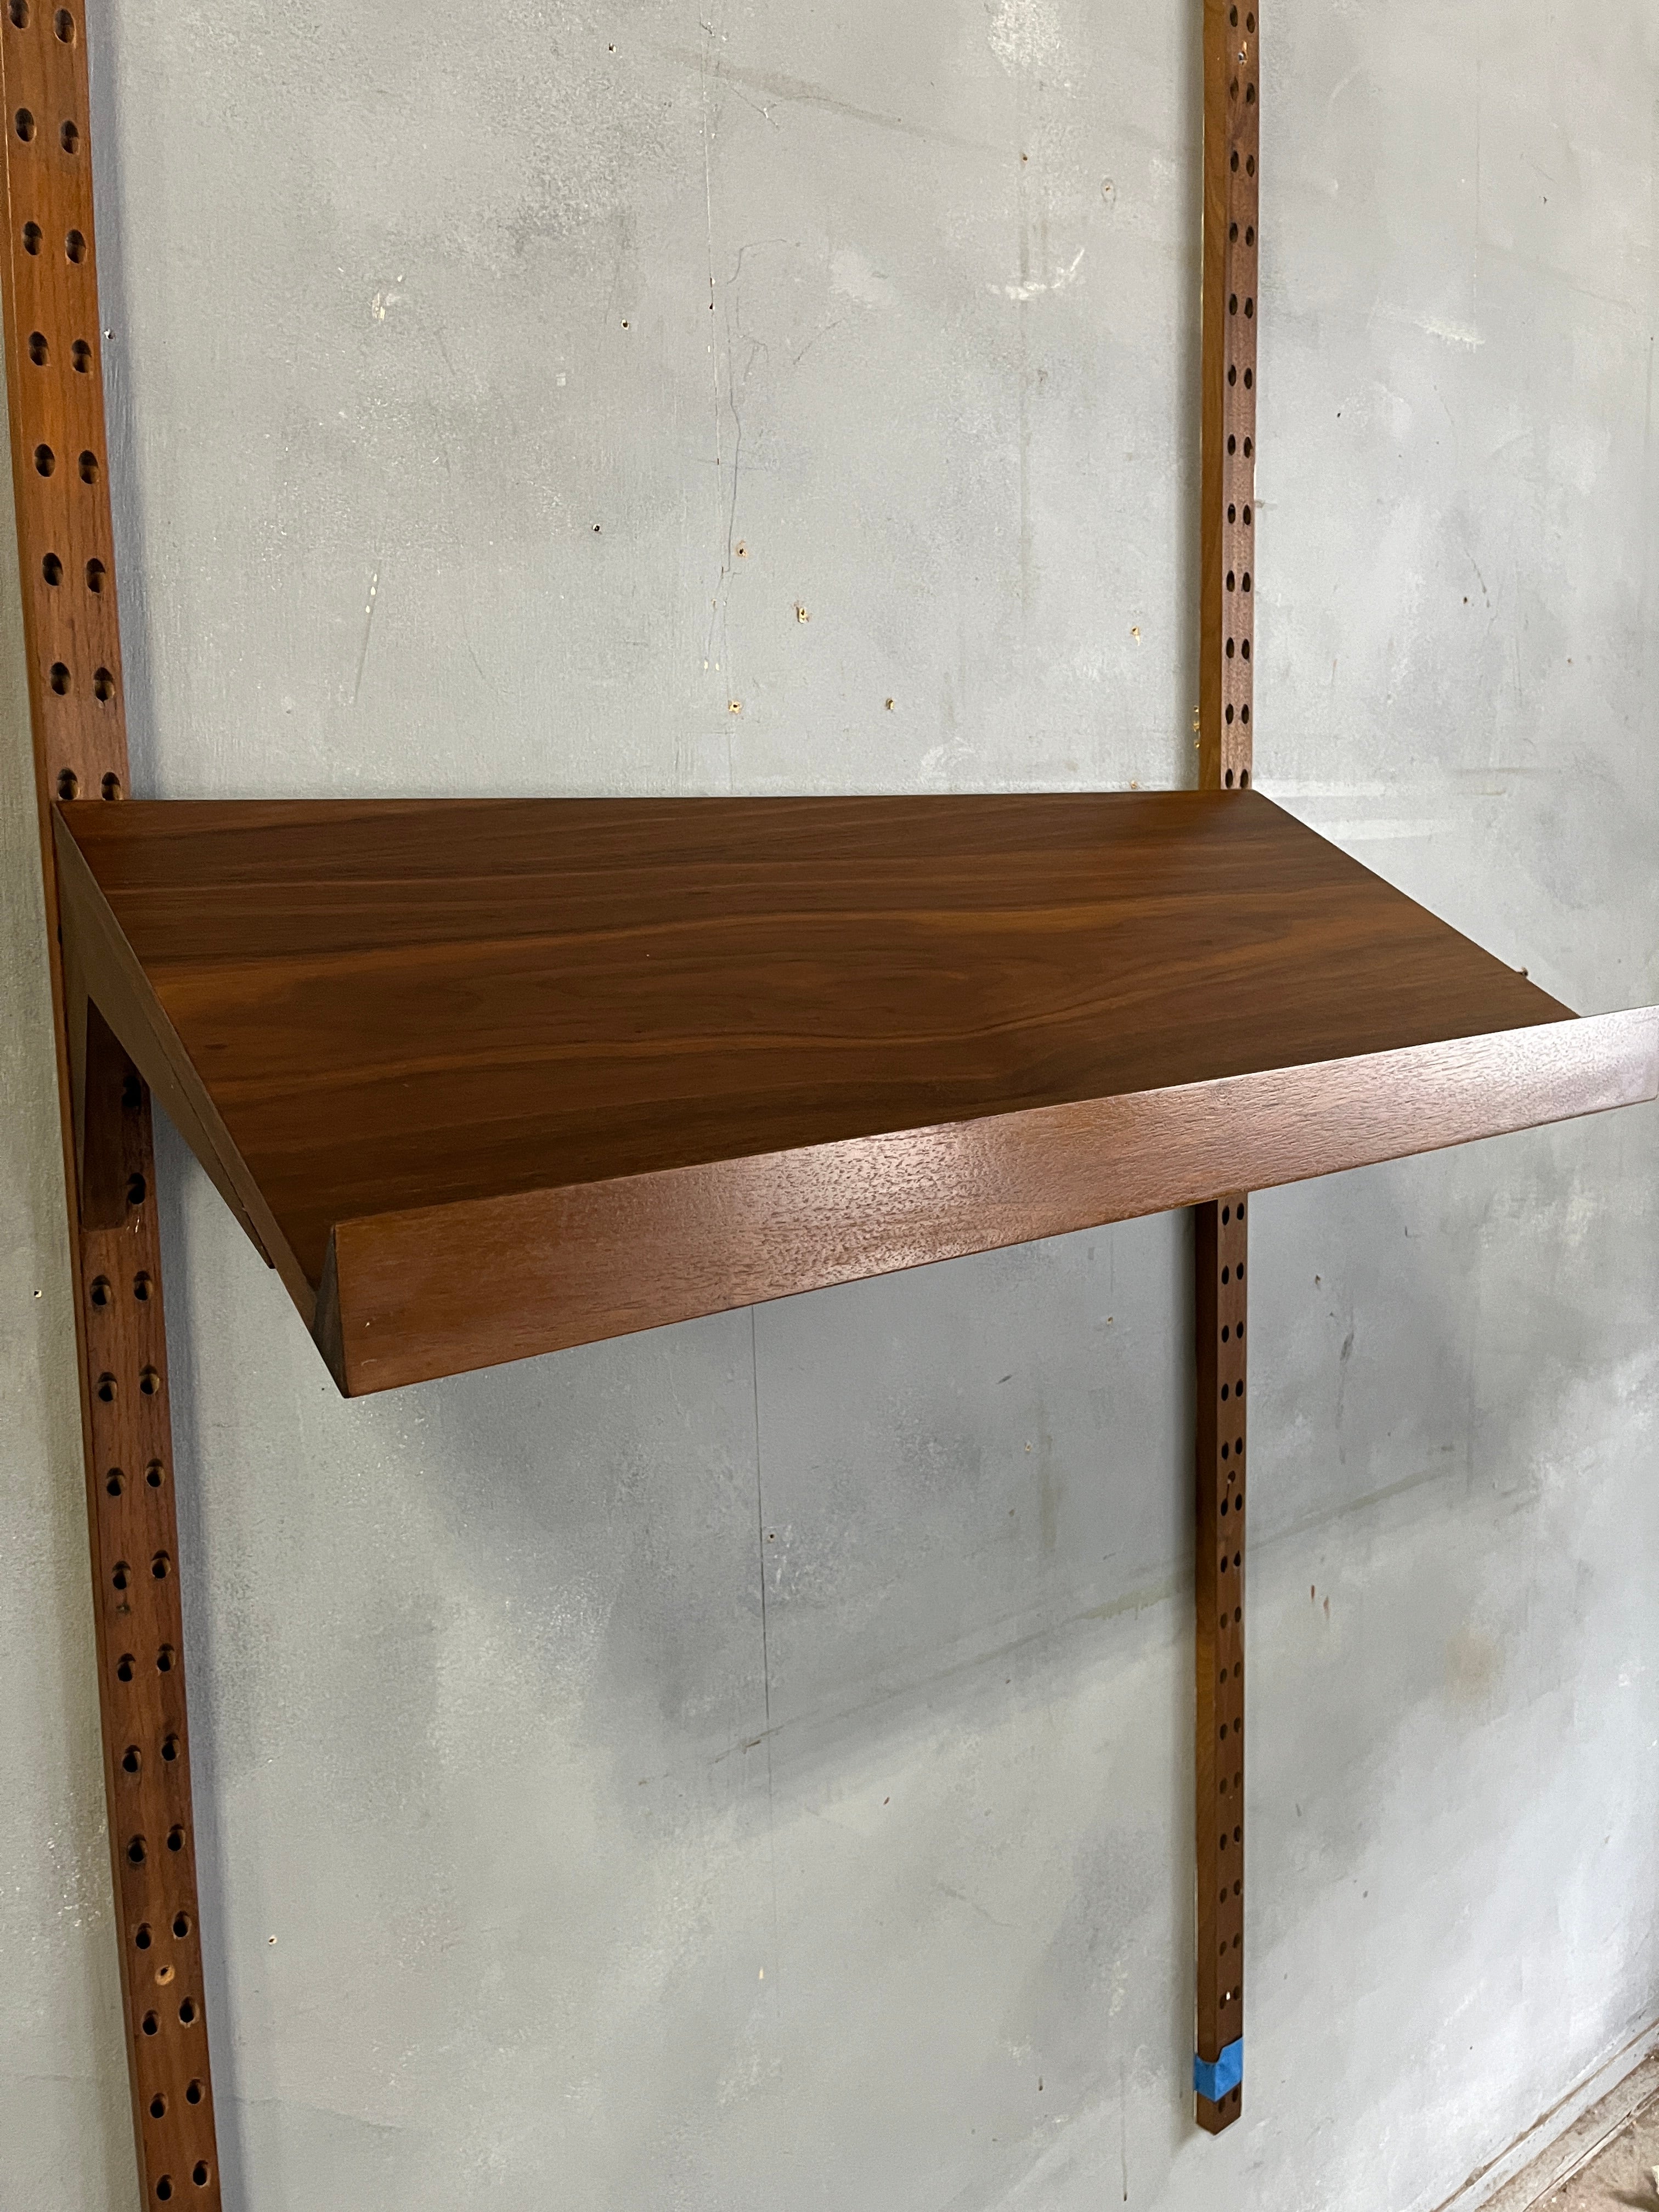 Beautiful  Walnut Cado System display shelf thats meant to hold books or flat artwork. The shelf has a beautiful catch at the bottom preventing a book from falling off. The wood brackets are also angled down. Please specify if your unit is darker or